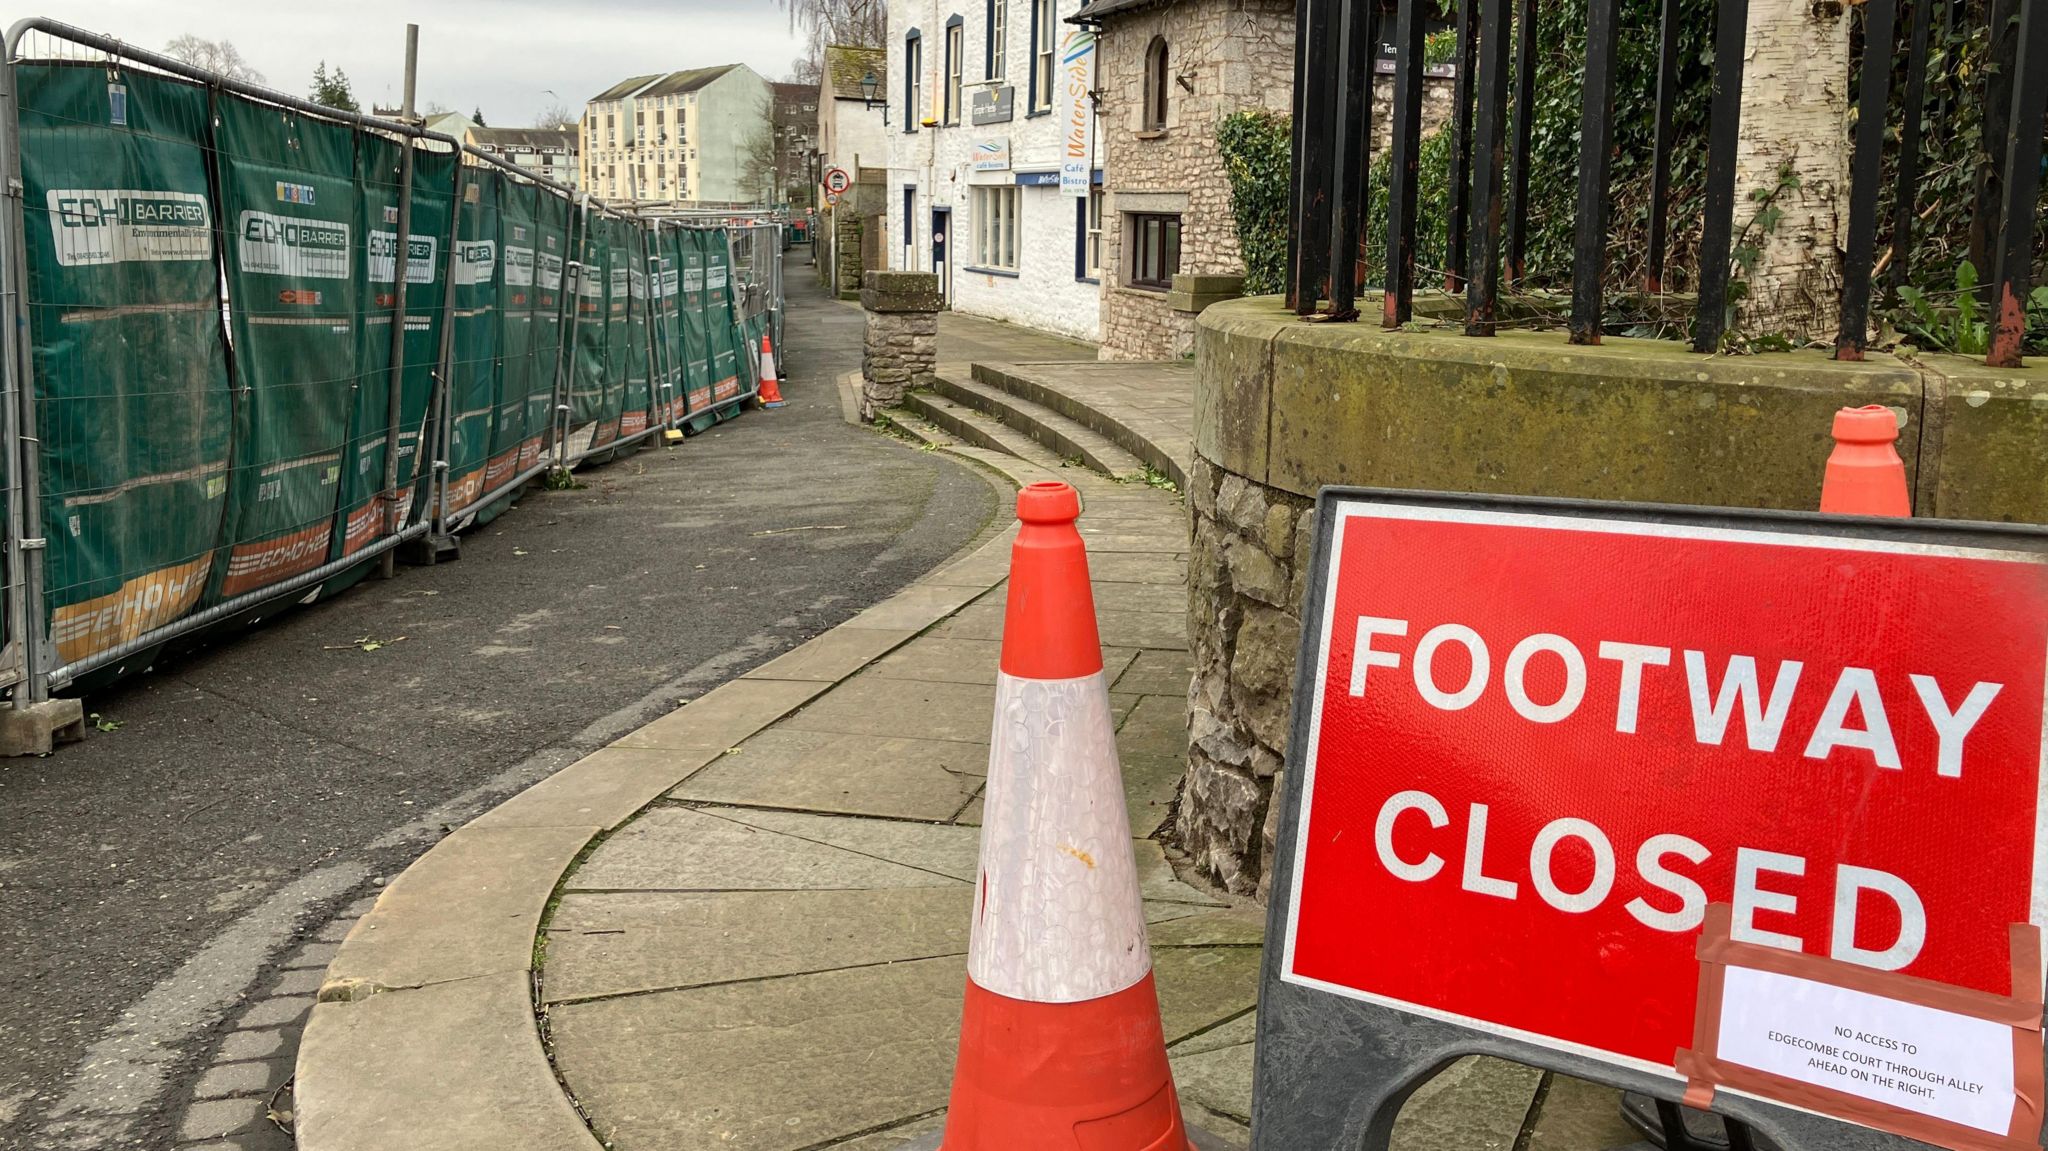 A "footway closed" sign in front of construction